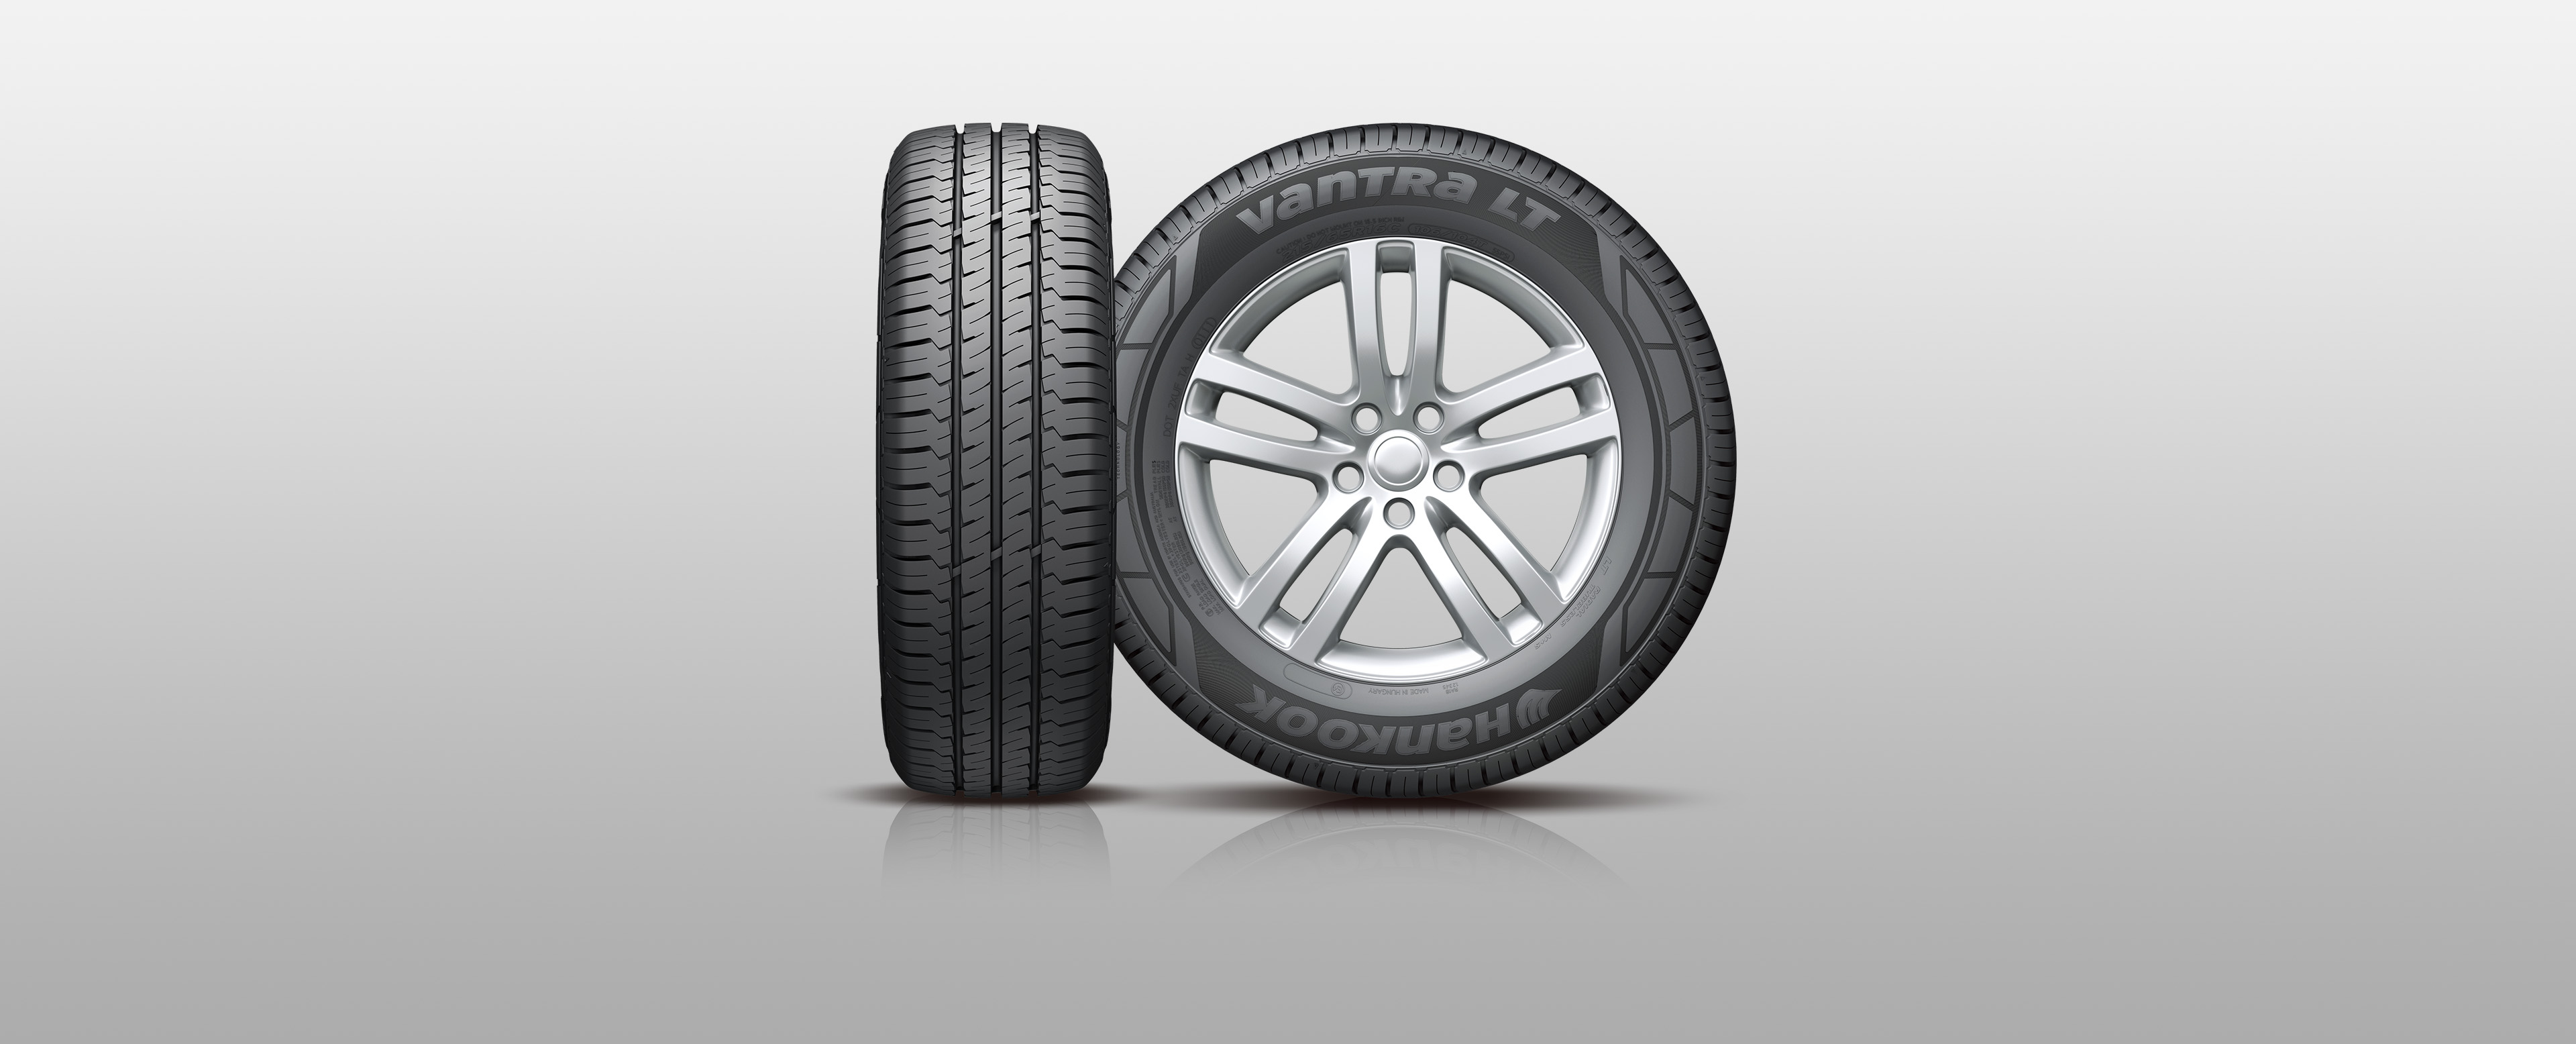 Hankook Tire & Technology-Tires-Vantra-Vantra LT-RA18-Extended mileage and enhanced durability for commercial vans